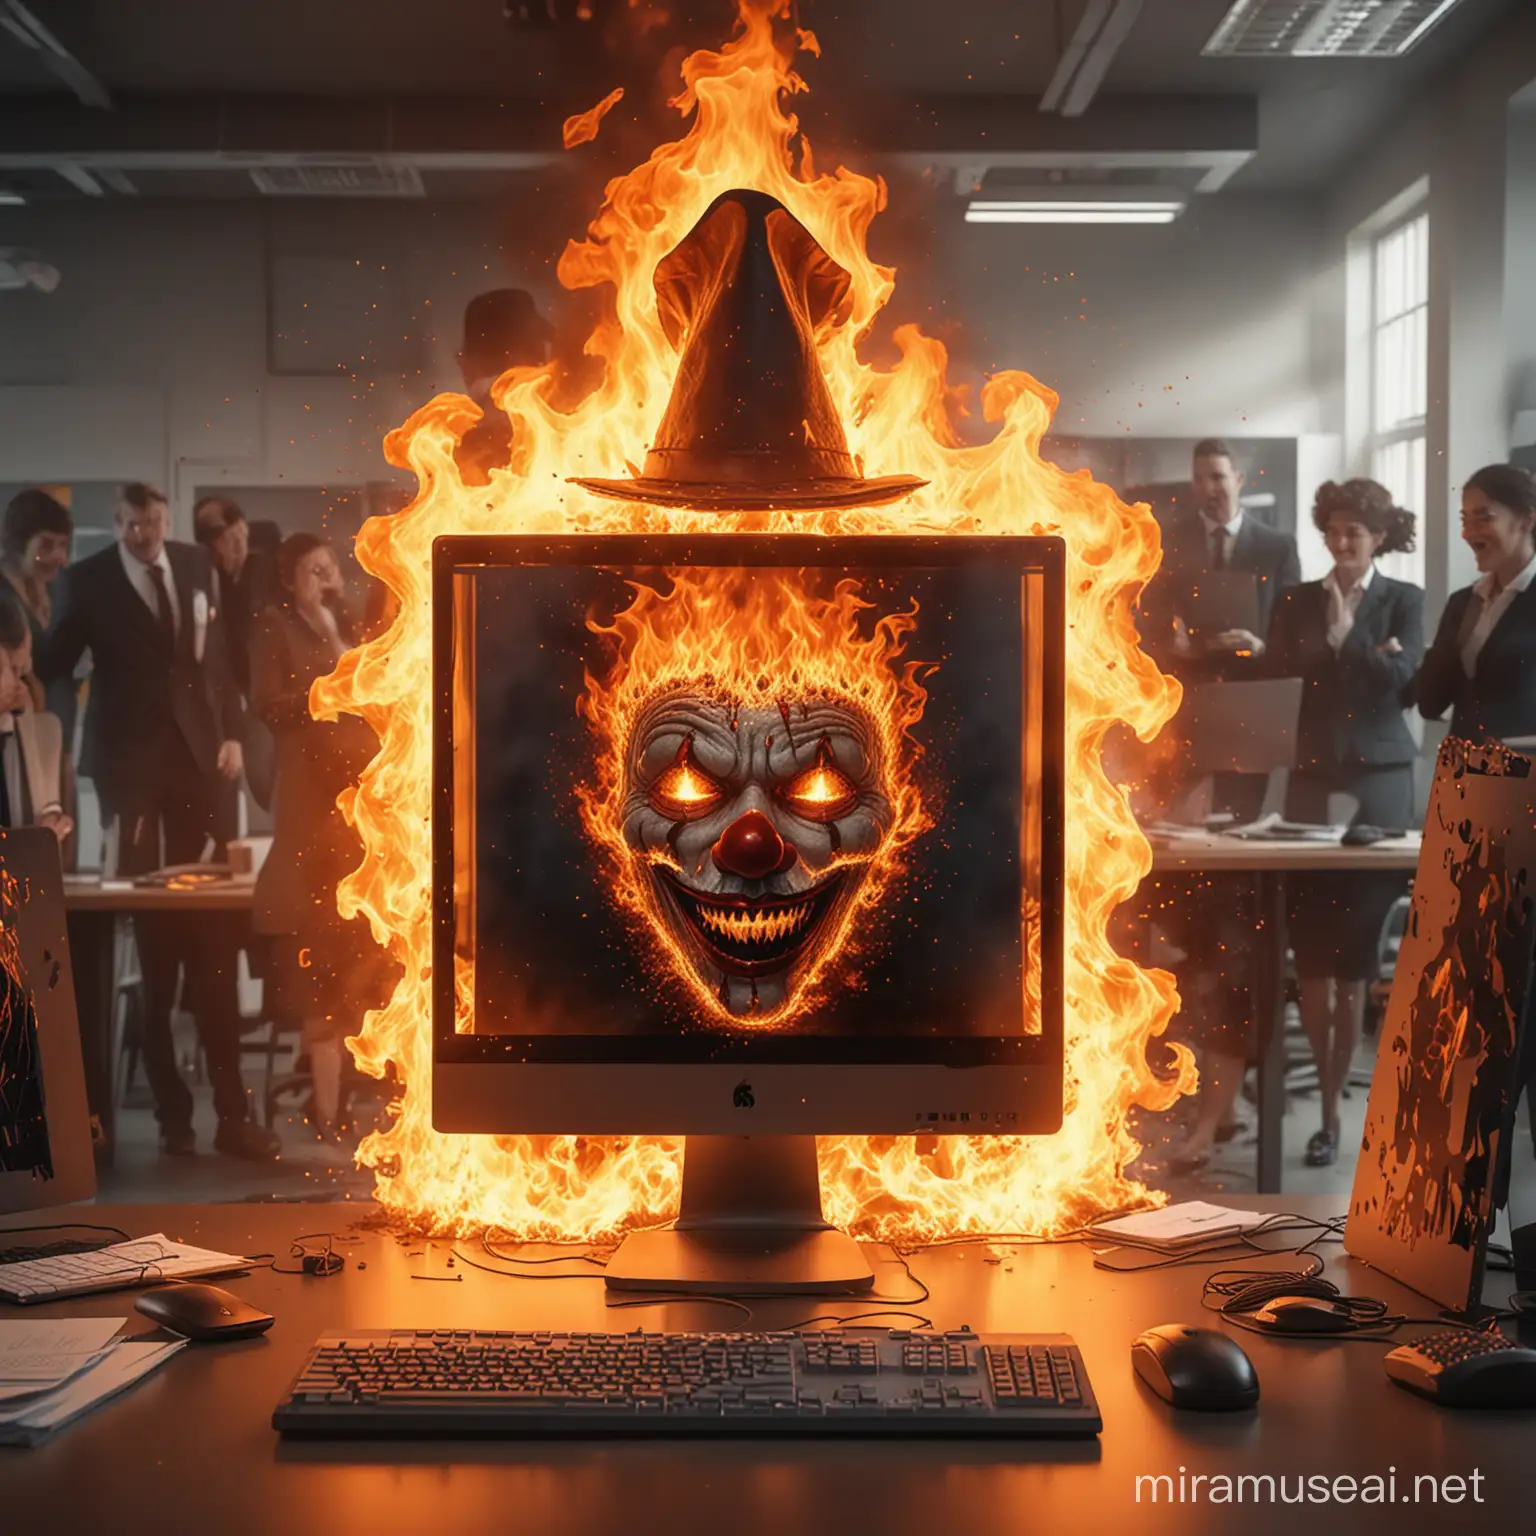 Generate an image of a graphics PC engulfed in flames, while office workers surrounding it are laughing hysterically. The scene should be surreal and absurd, with the flames forming intricate patterns and the office workers wearing clown noses and oversized hats